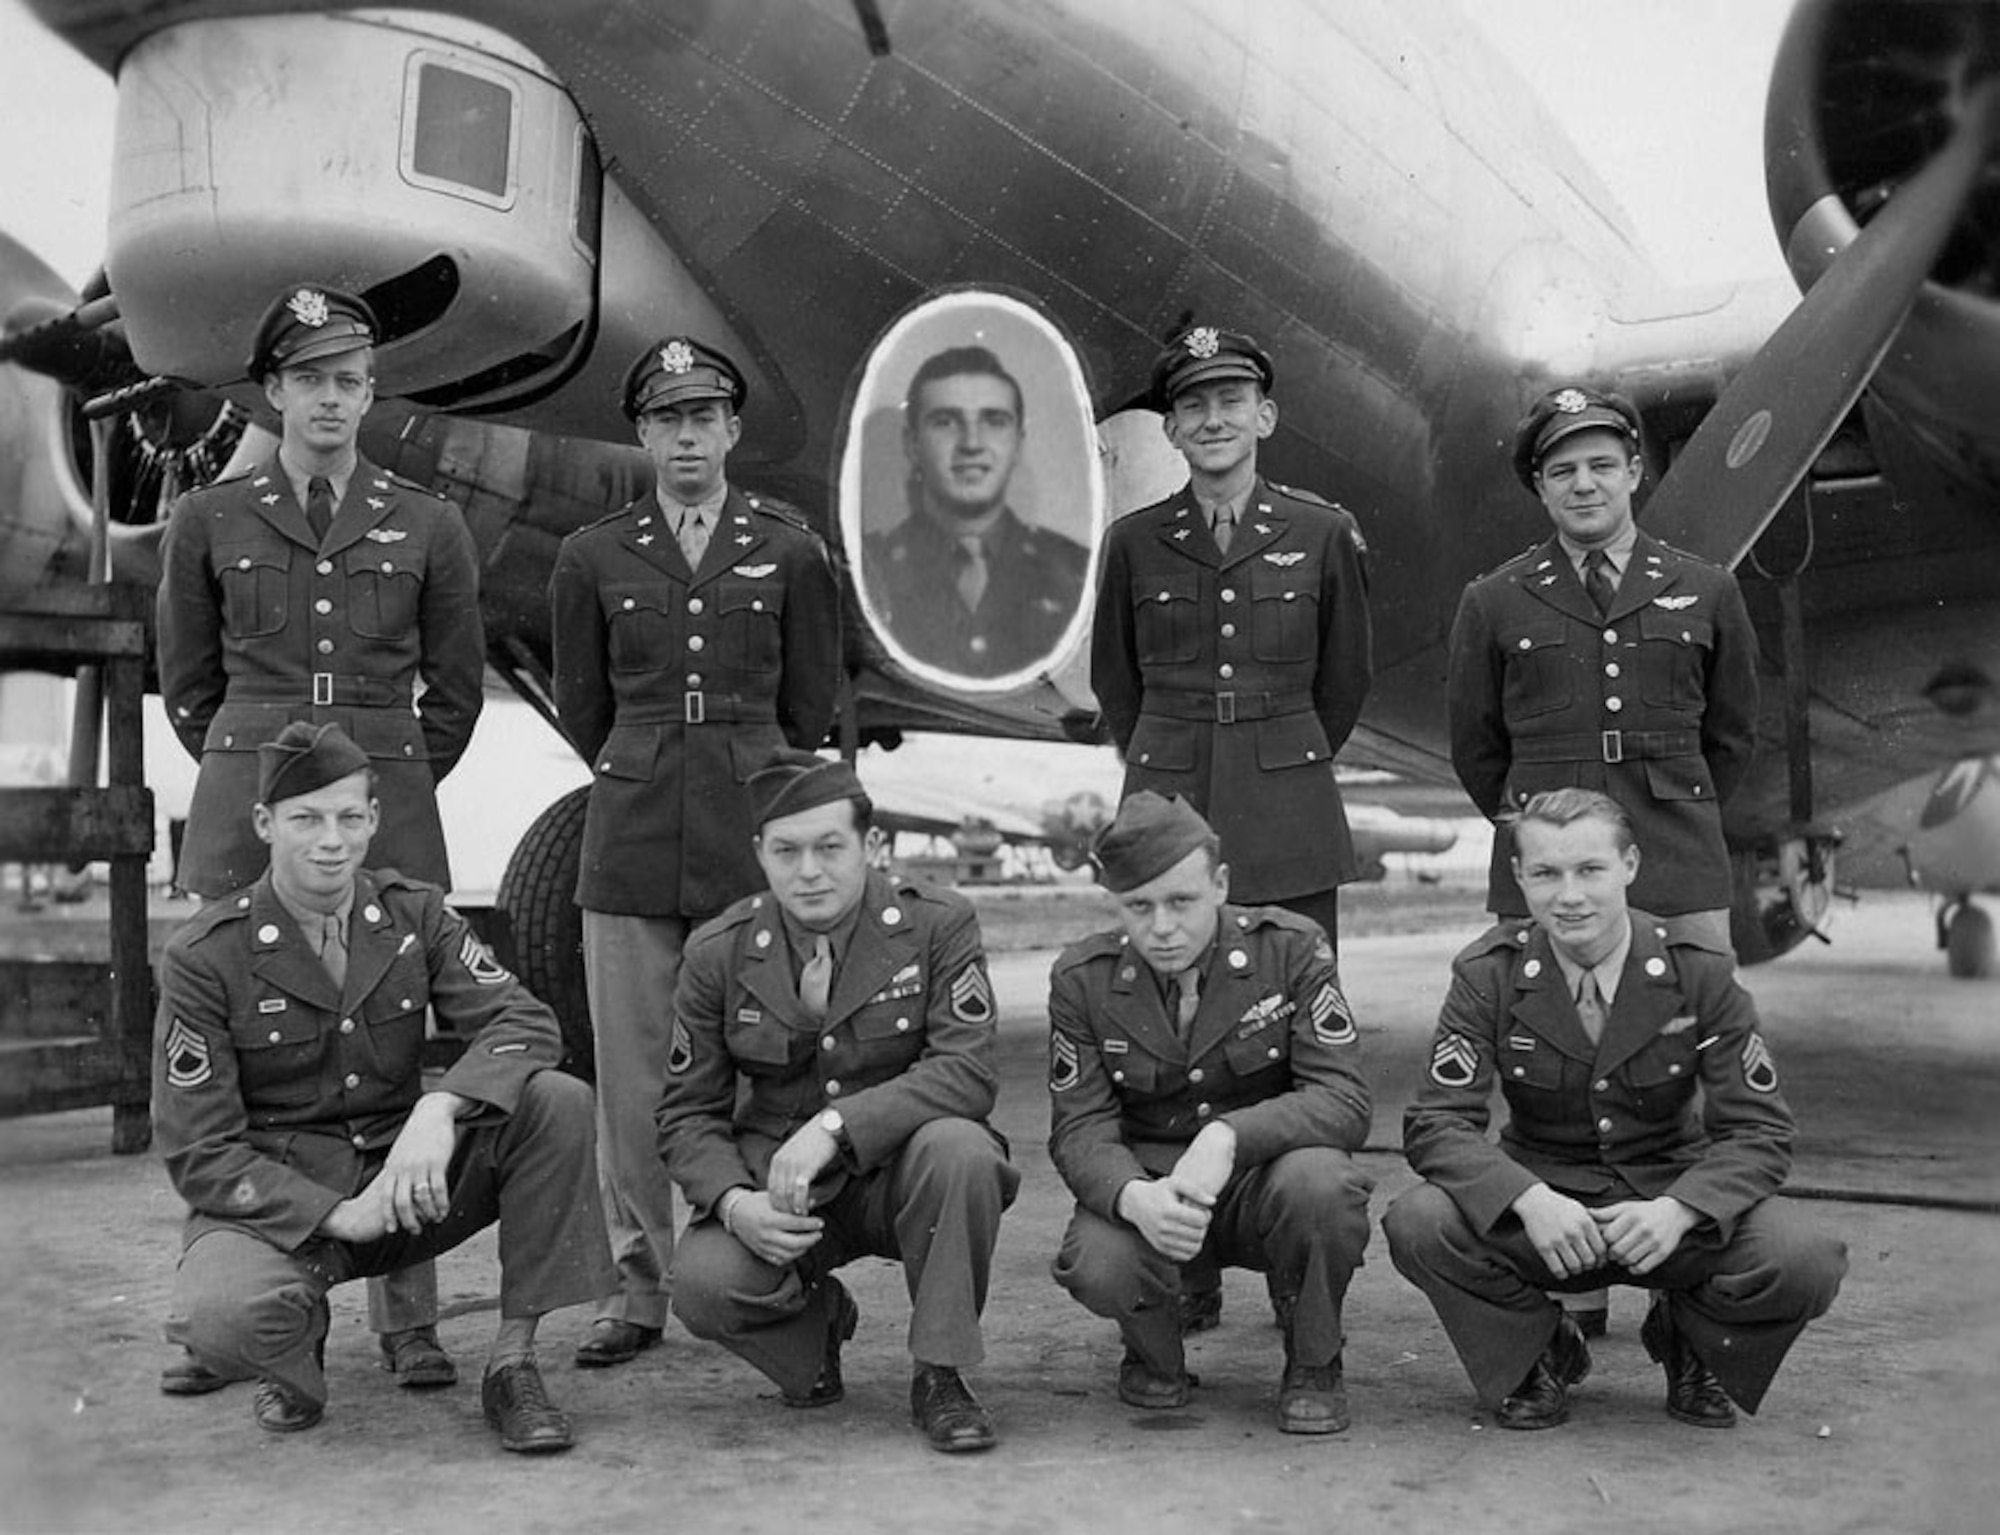 Veterans of The Mighty Eighth: The Oregon Air National Guard’s connections to the Eighth Air Force of World War II